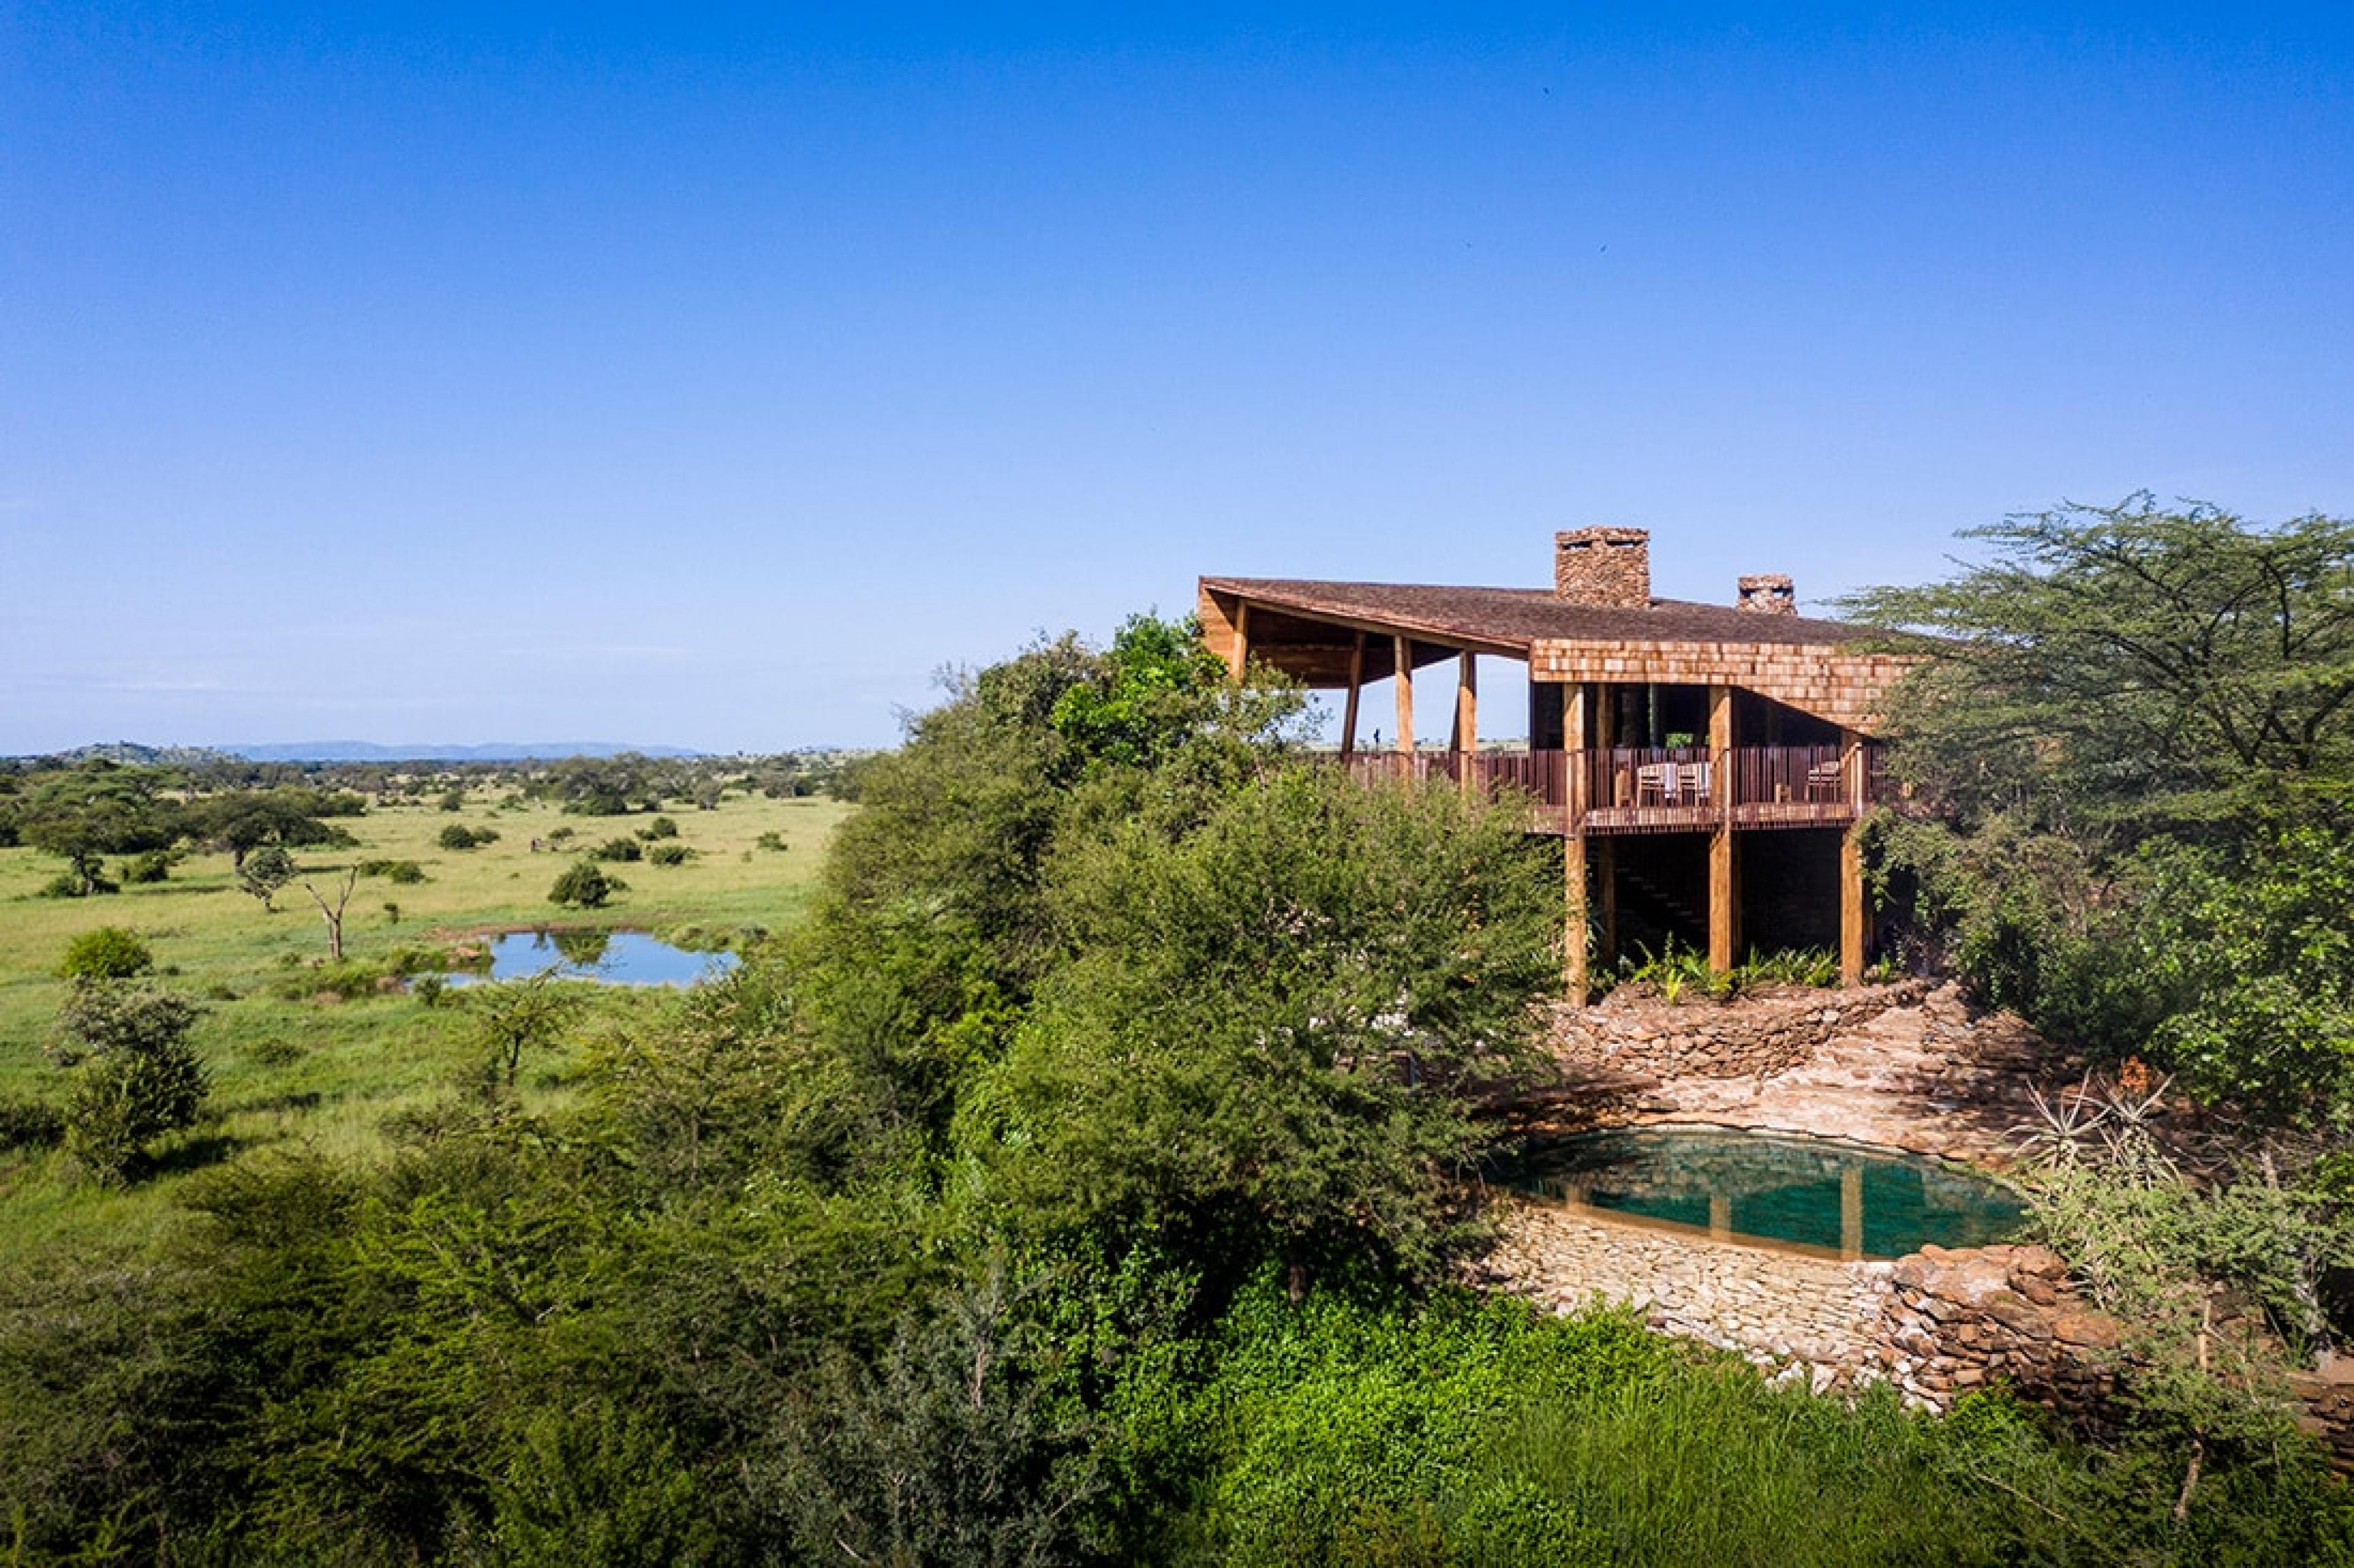 safari lodge aerial view with two-story building surrounded by trees